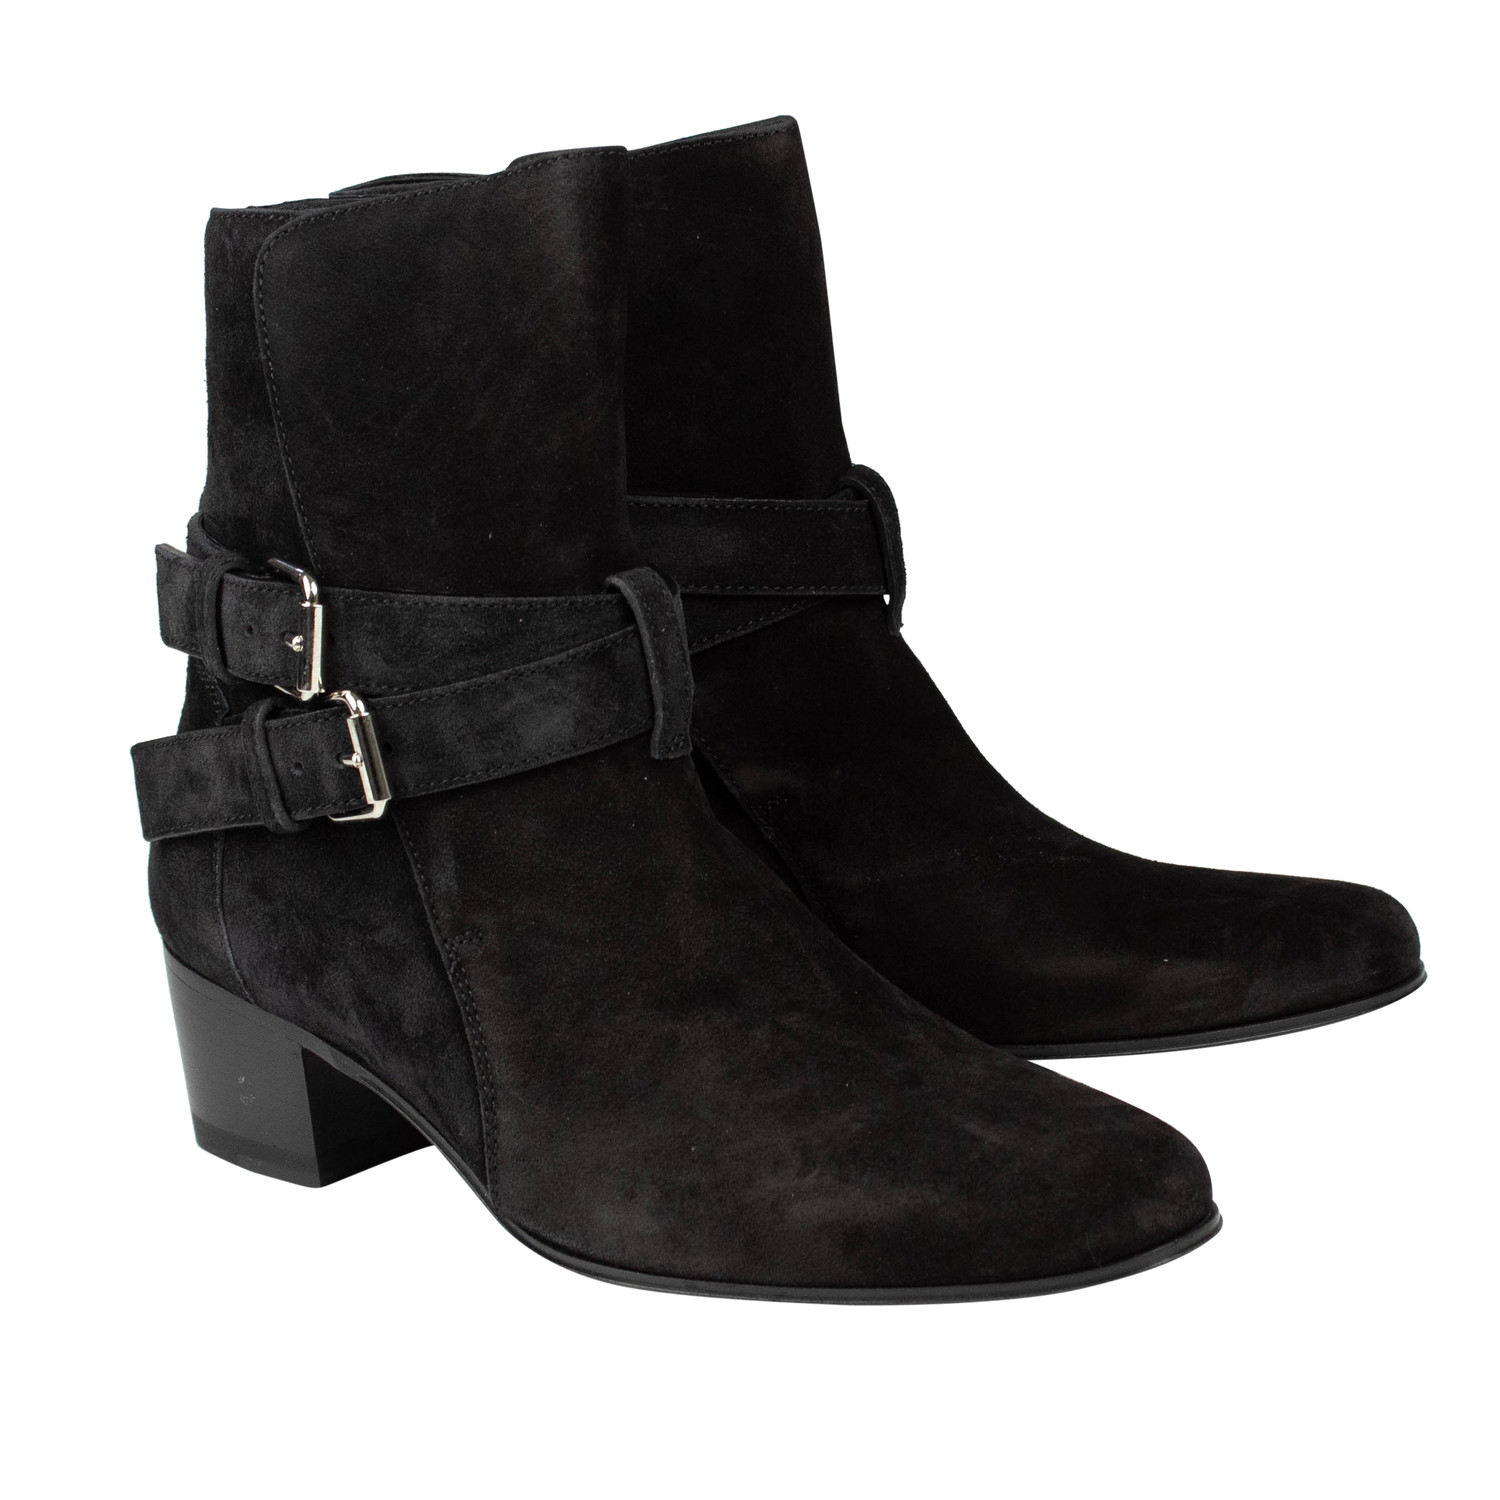 Amiri // Suede Leather Buckle Boots 